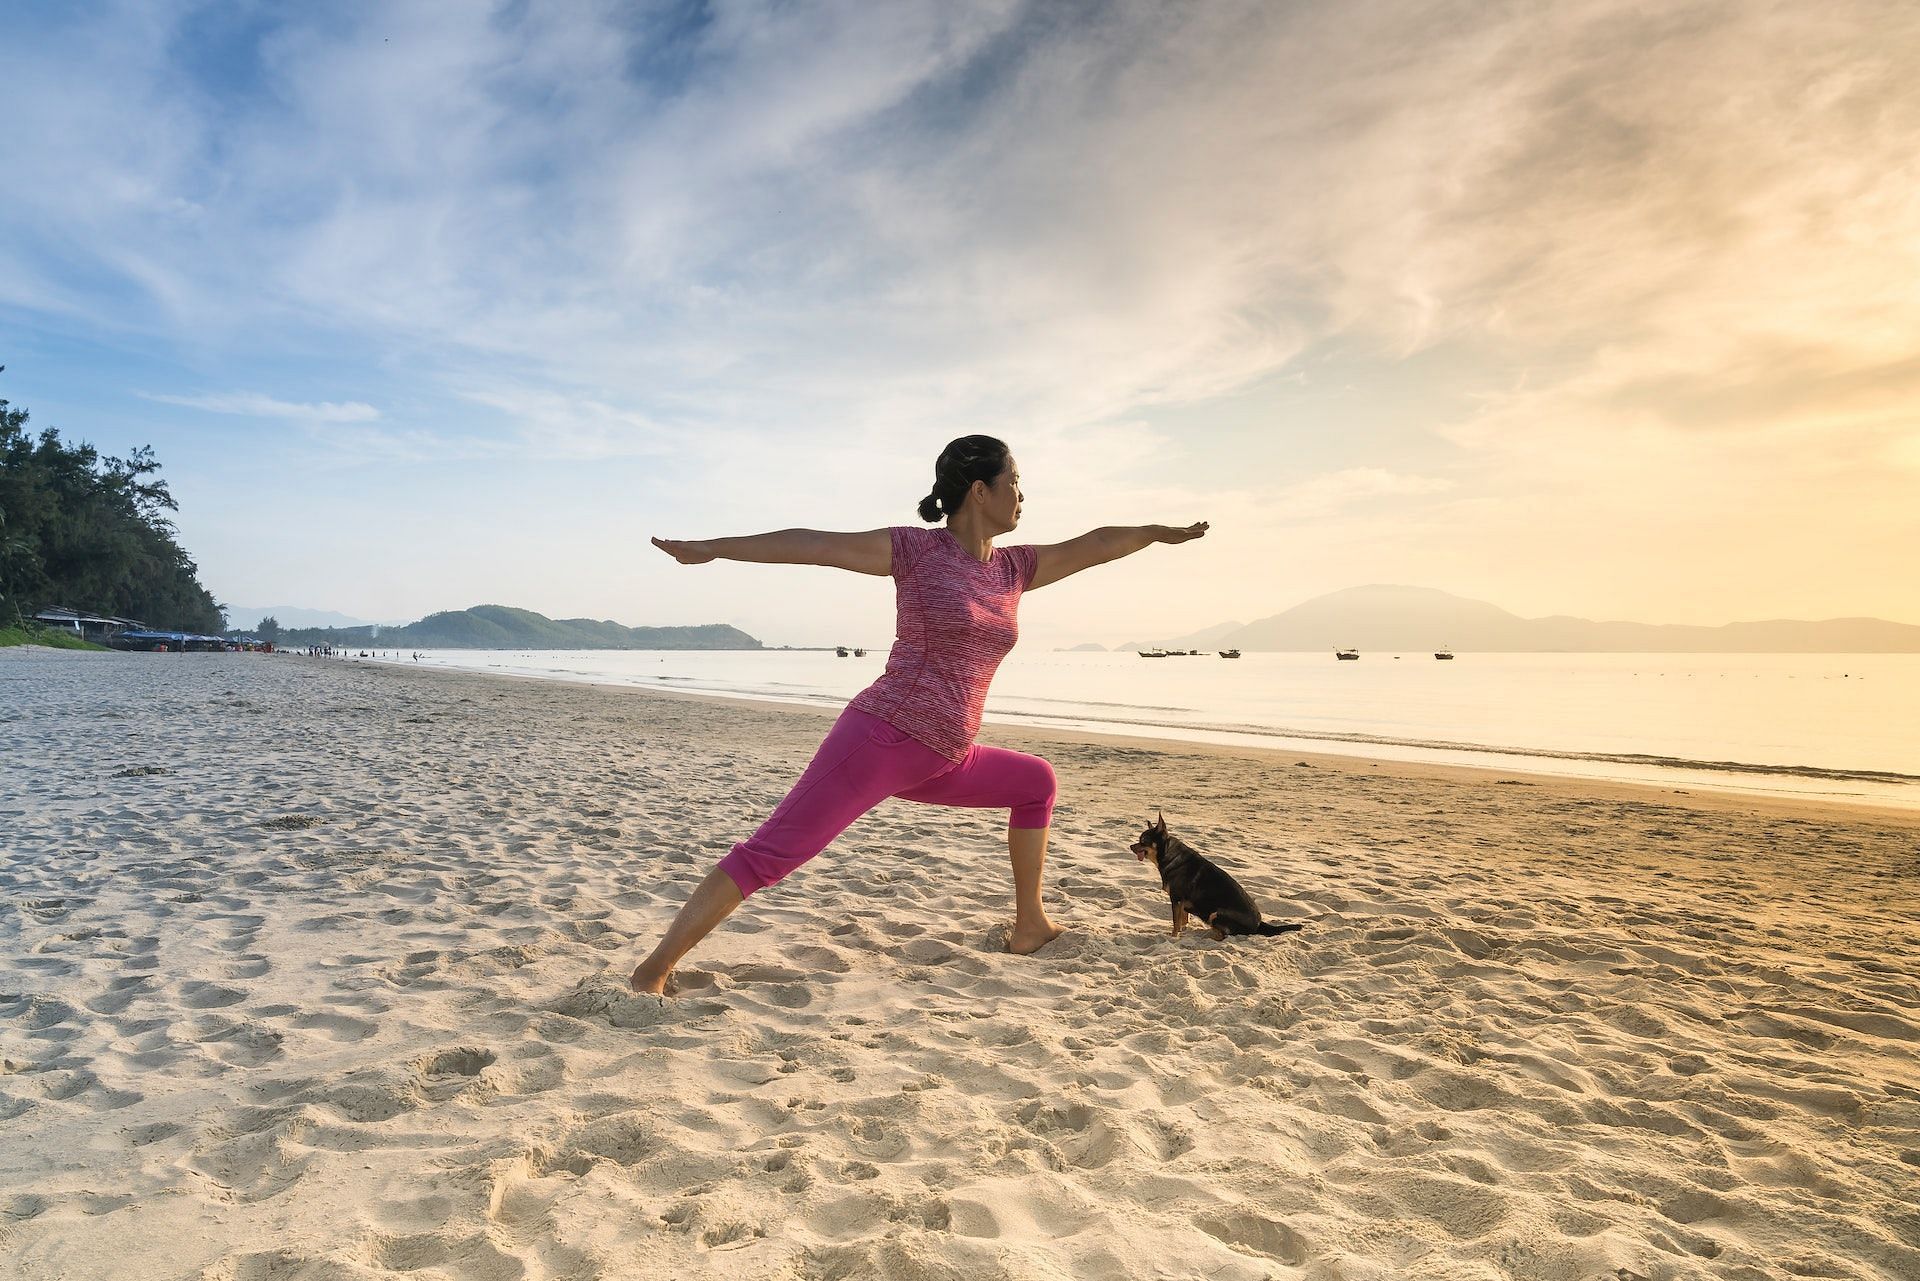 Start your day on a positive note with the best beach yoga poses. (Image via Pexels/ Quang Nguyen Vinh)